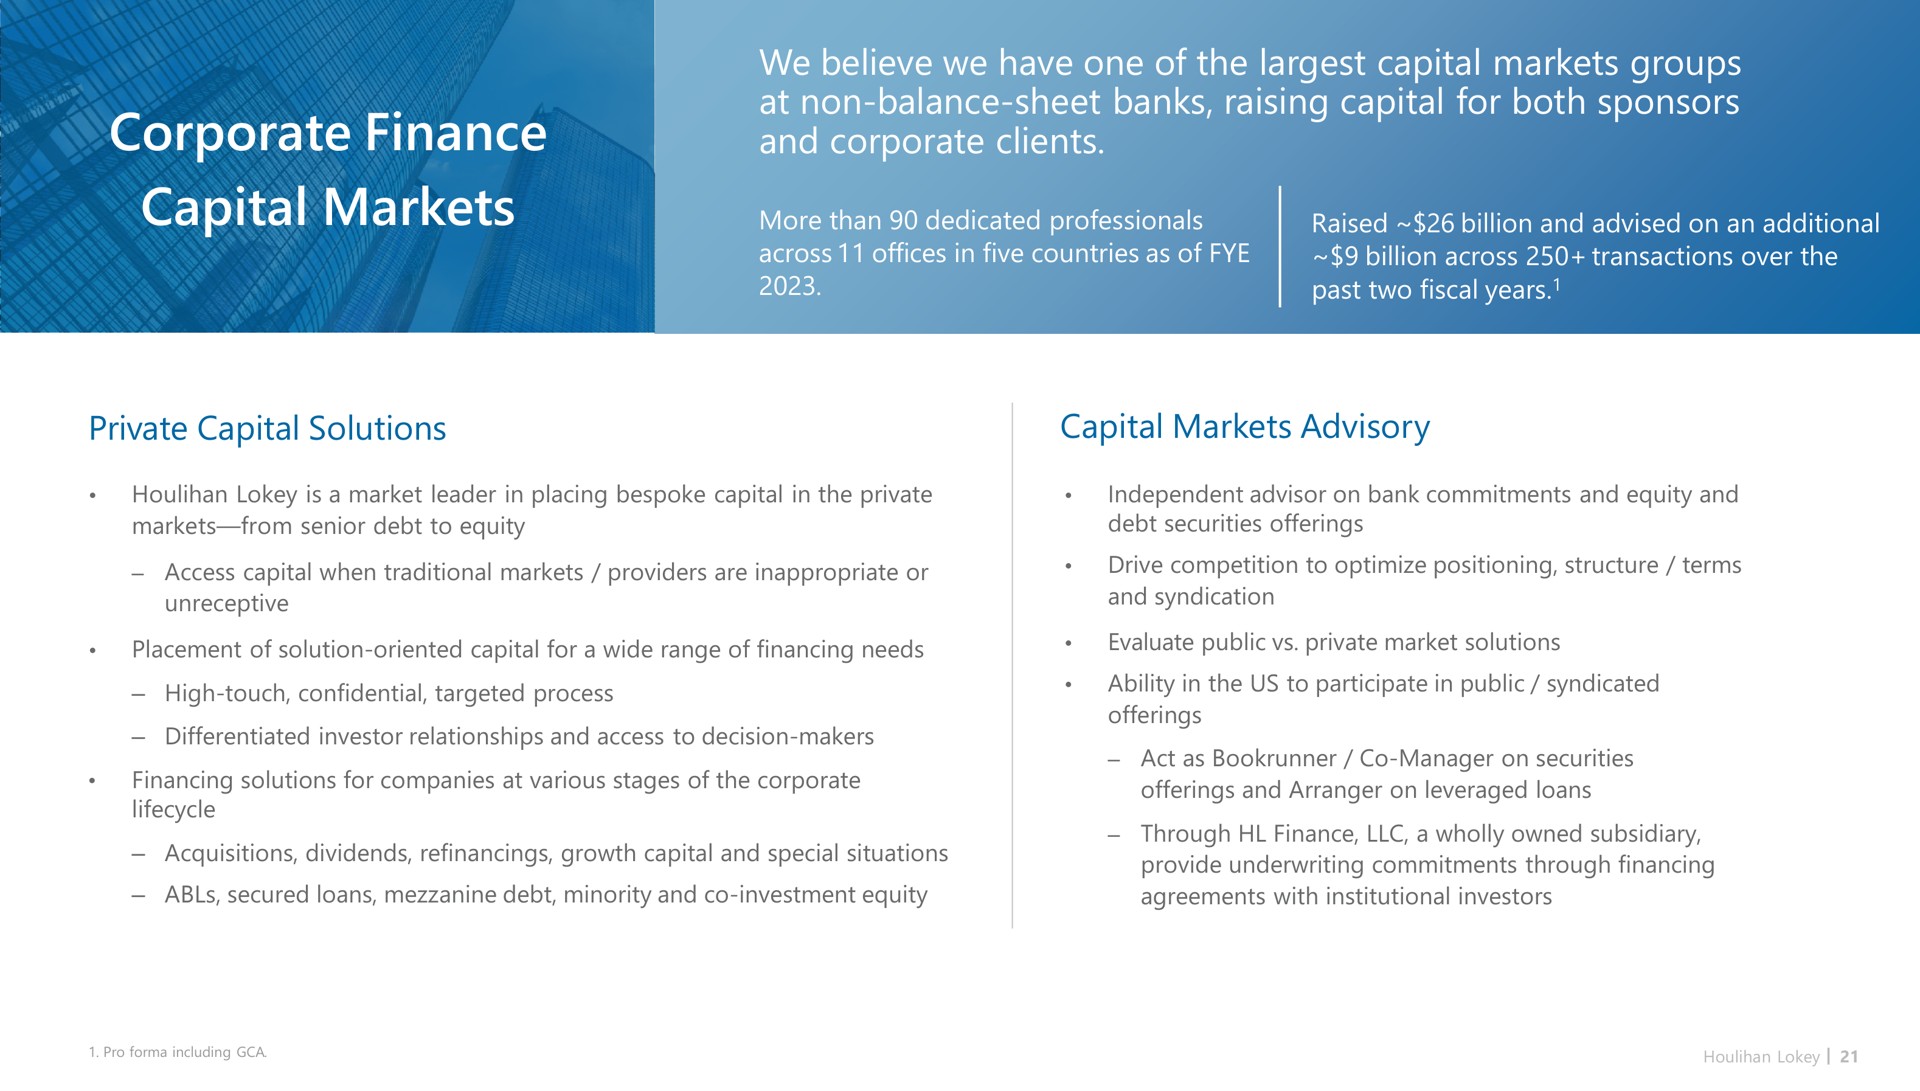 corporate finance capital markets we believe we have one of the capital markets groups at non balance sheet banks raising capital for both sponsors and corporate clients private capital solutions capital markets advisory | Houlihan Lokey